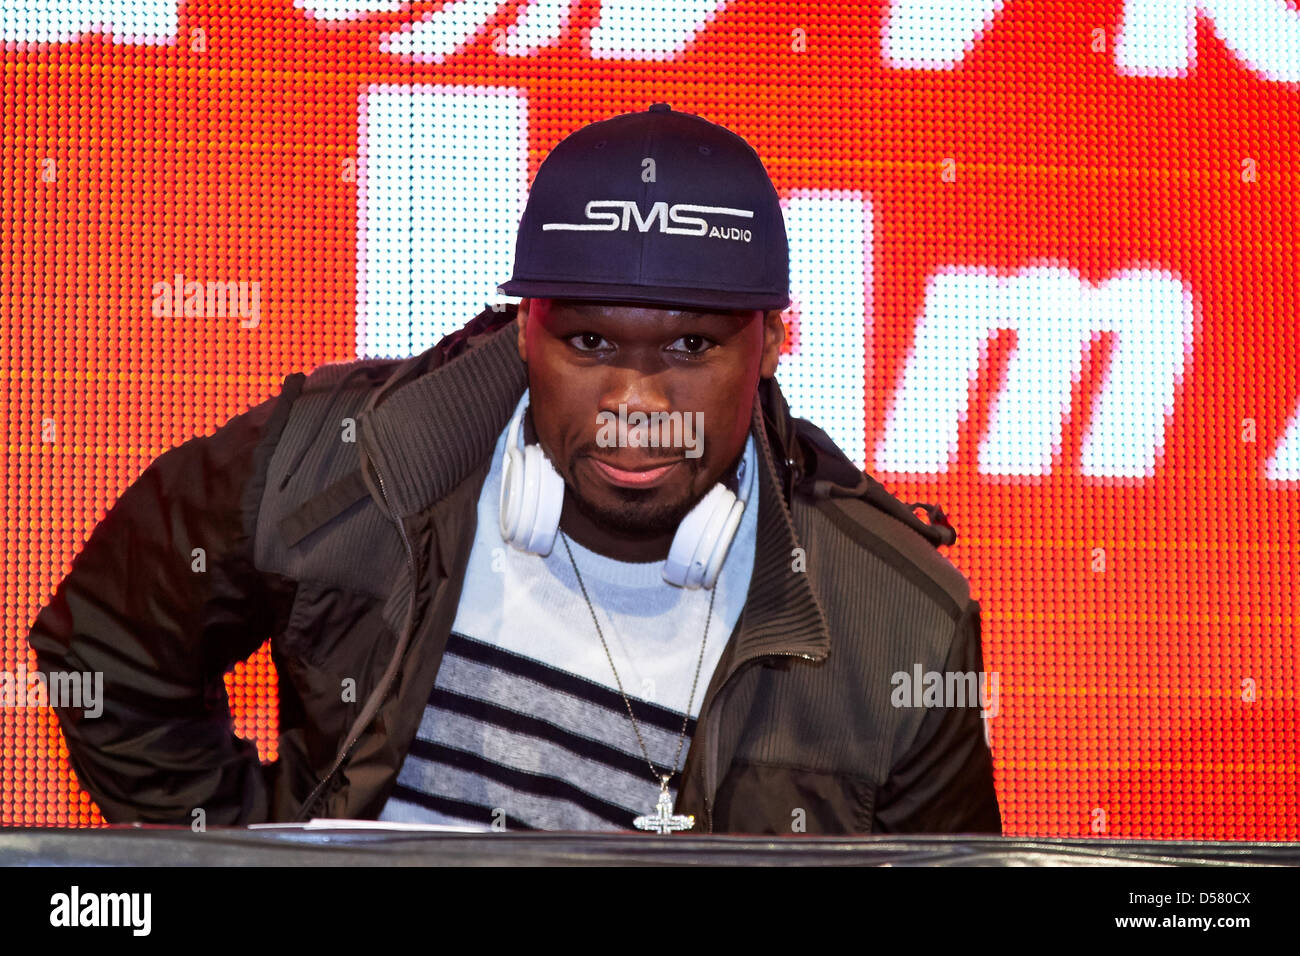 Berlin, Germany. 26th March, 2013. 50 Cent (Curtis James Jackson), U.S. rap star, introduces his new company SMS Audio Headphones with autograph session at Media Markt in the ALEXA in Berlin. Stock Photo